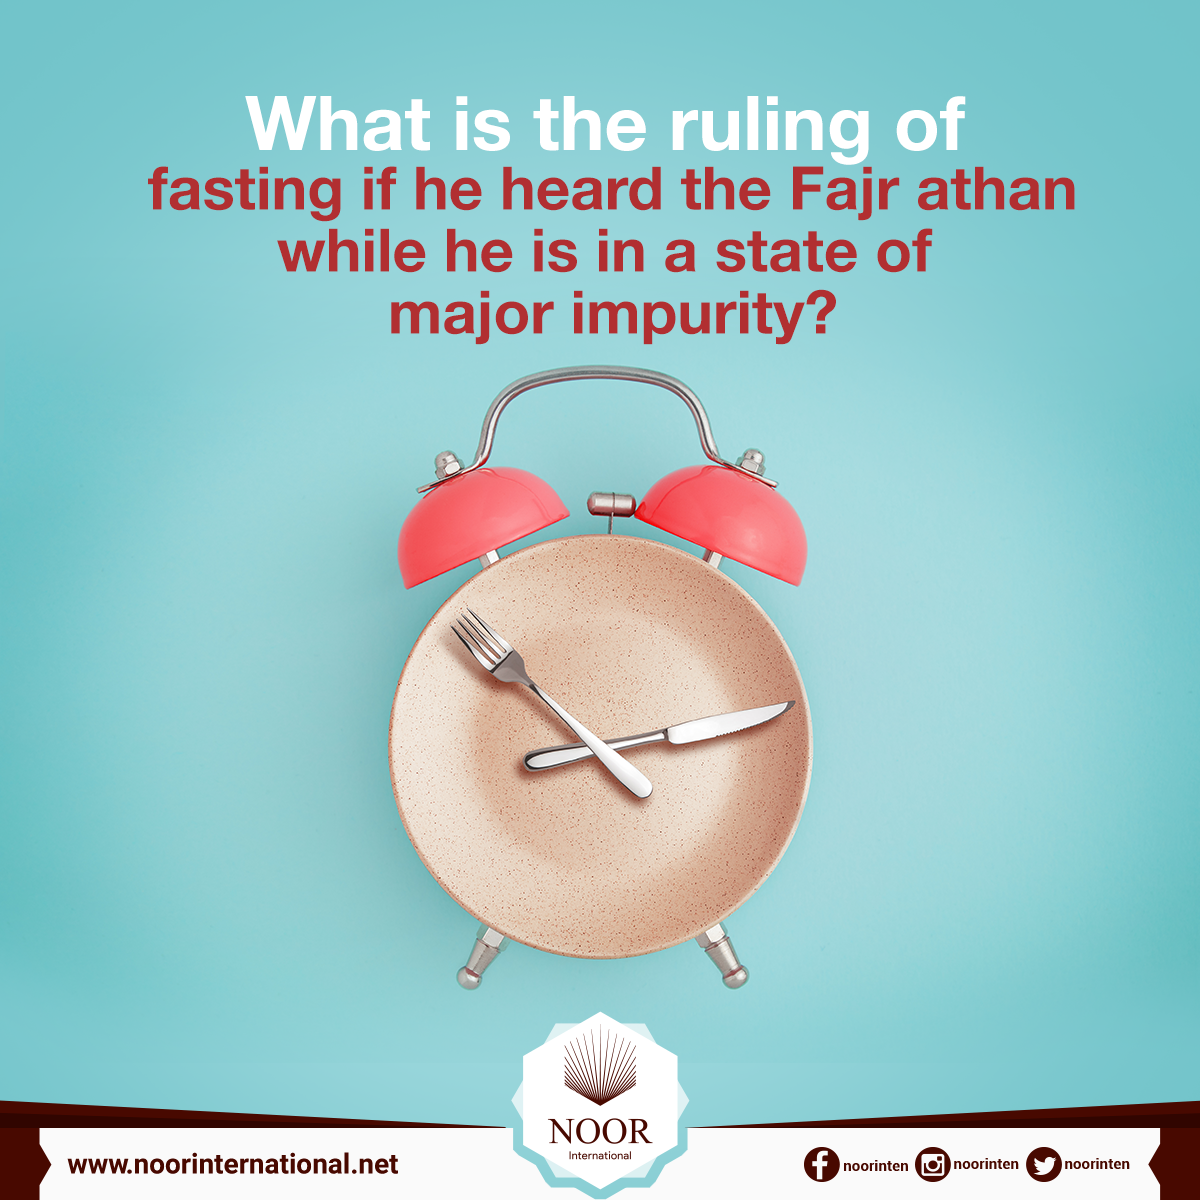 What is the ruling of one`s fasting if he heard the Fajr athan while he is in a state of major impurity?